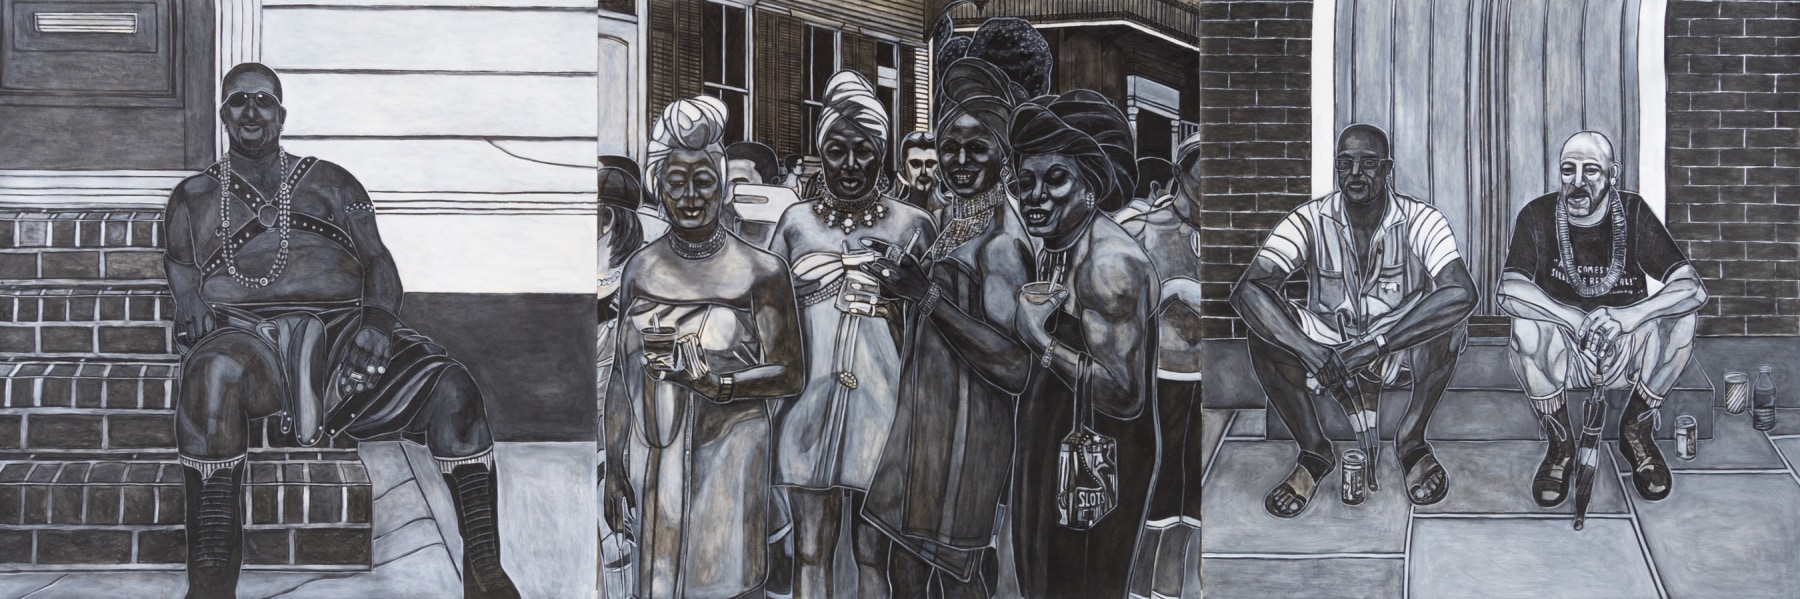 Willie Birch
Free to Be, 2004
Acrylic and charcoal on paper
60 x 180 inches